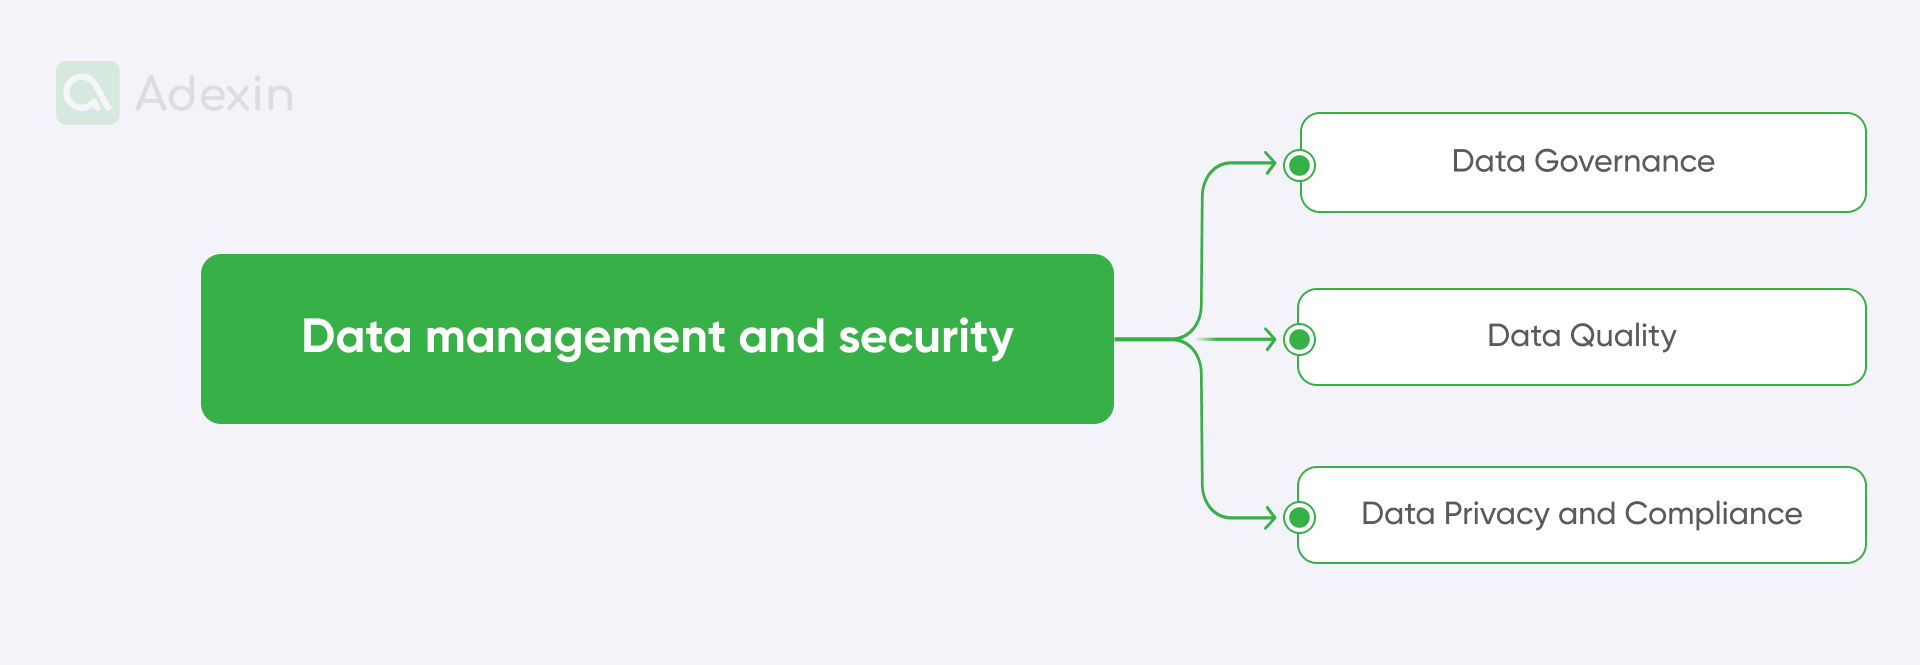 Elements of data management and security